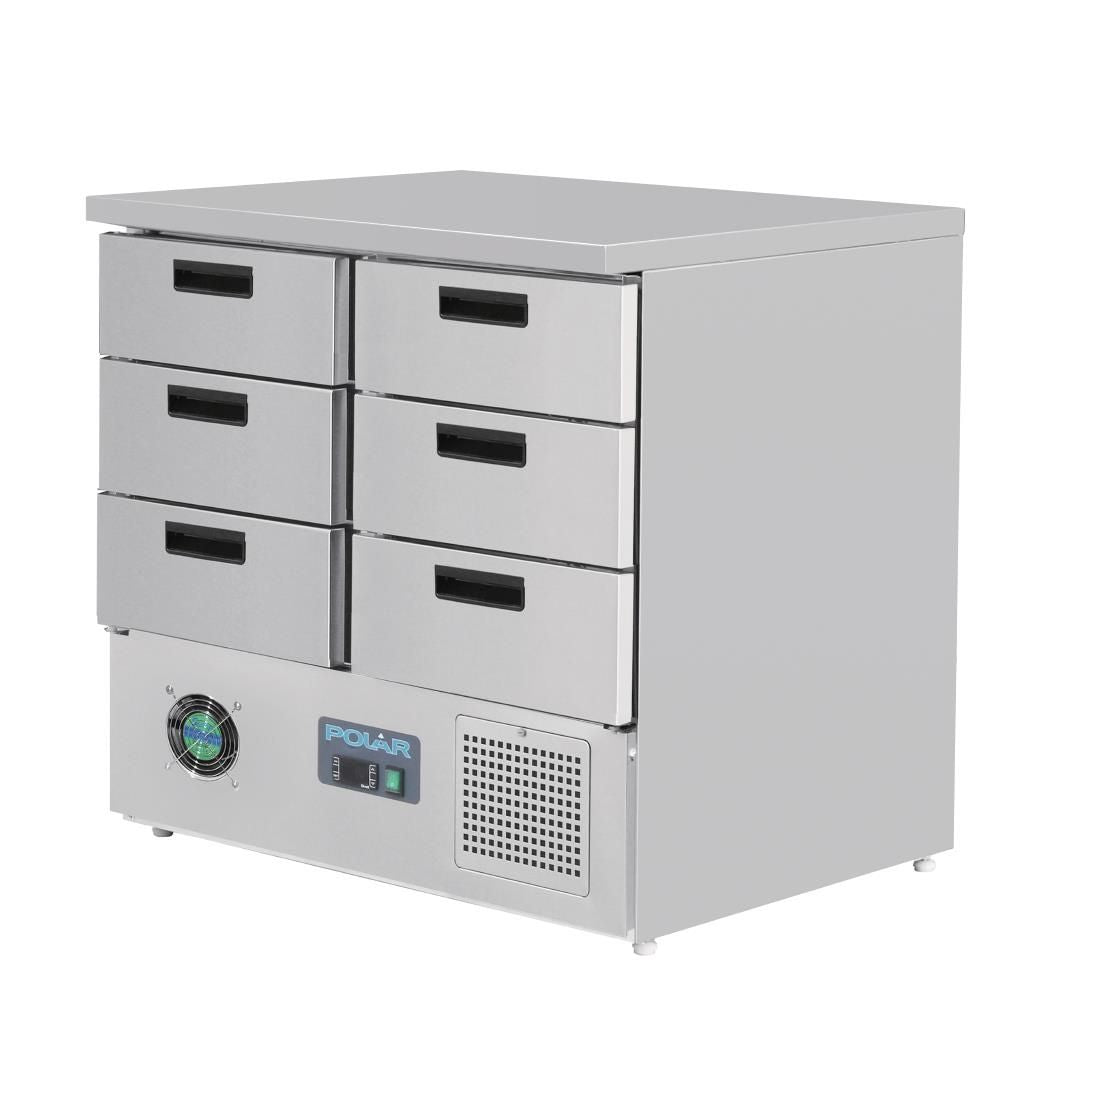 FA440 Polar G-Series Refrigerated Counter with 6 Drawers 240Ltr